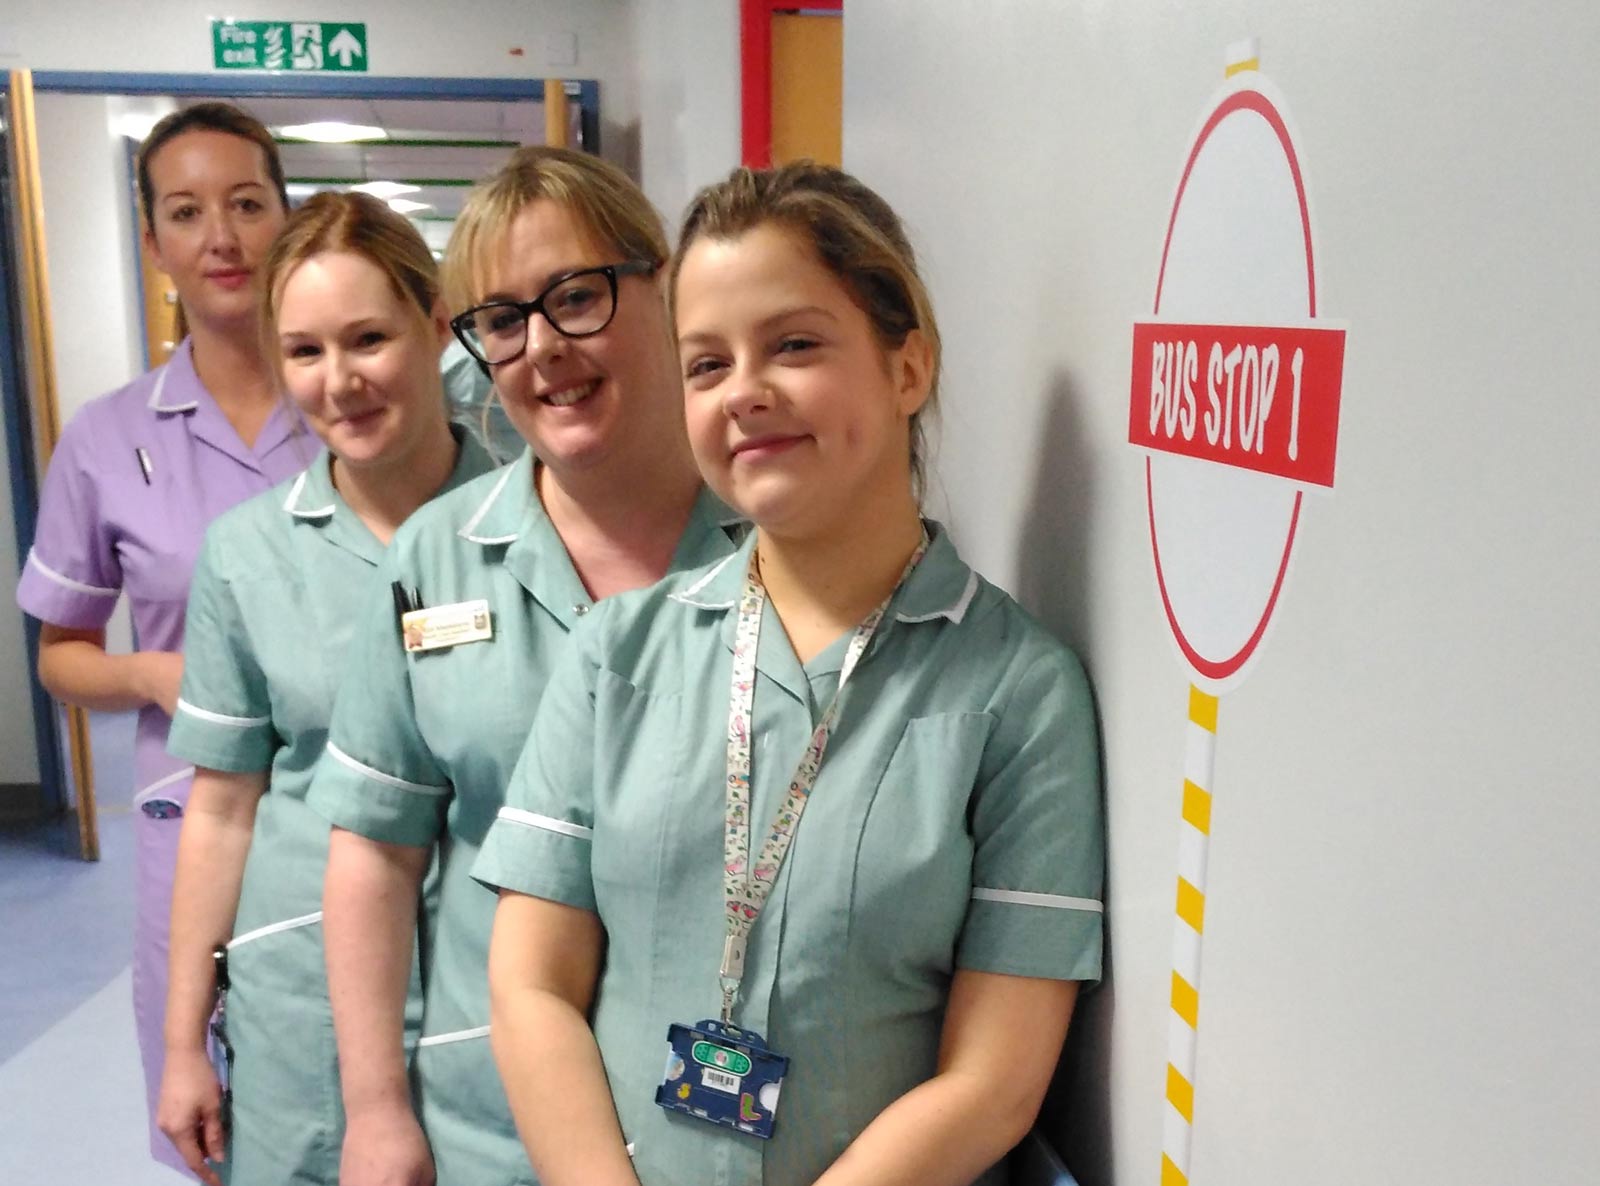 Staff members in the Children’s Outpatients Department at Harrogate District Hospital.